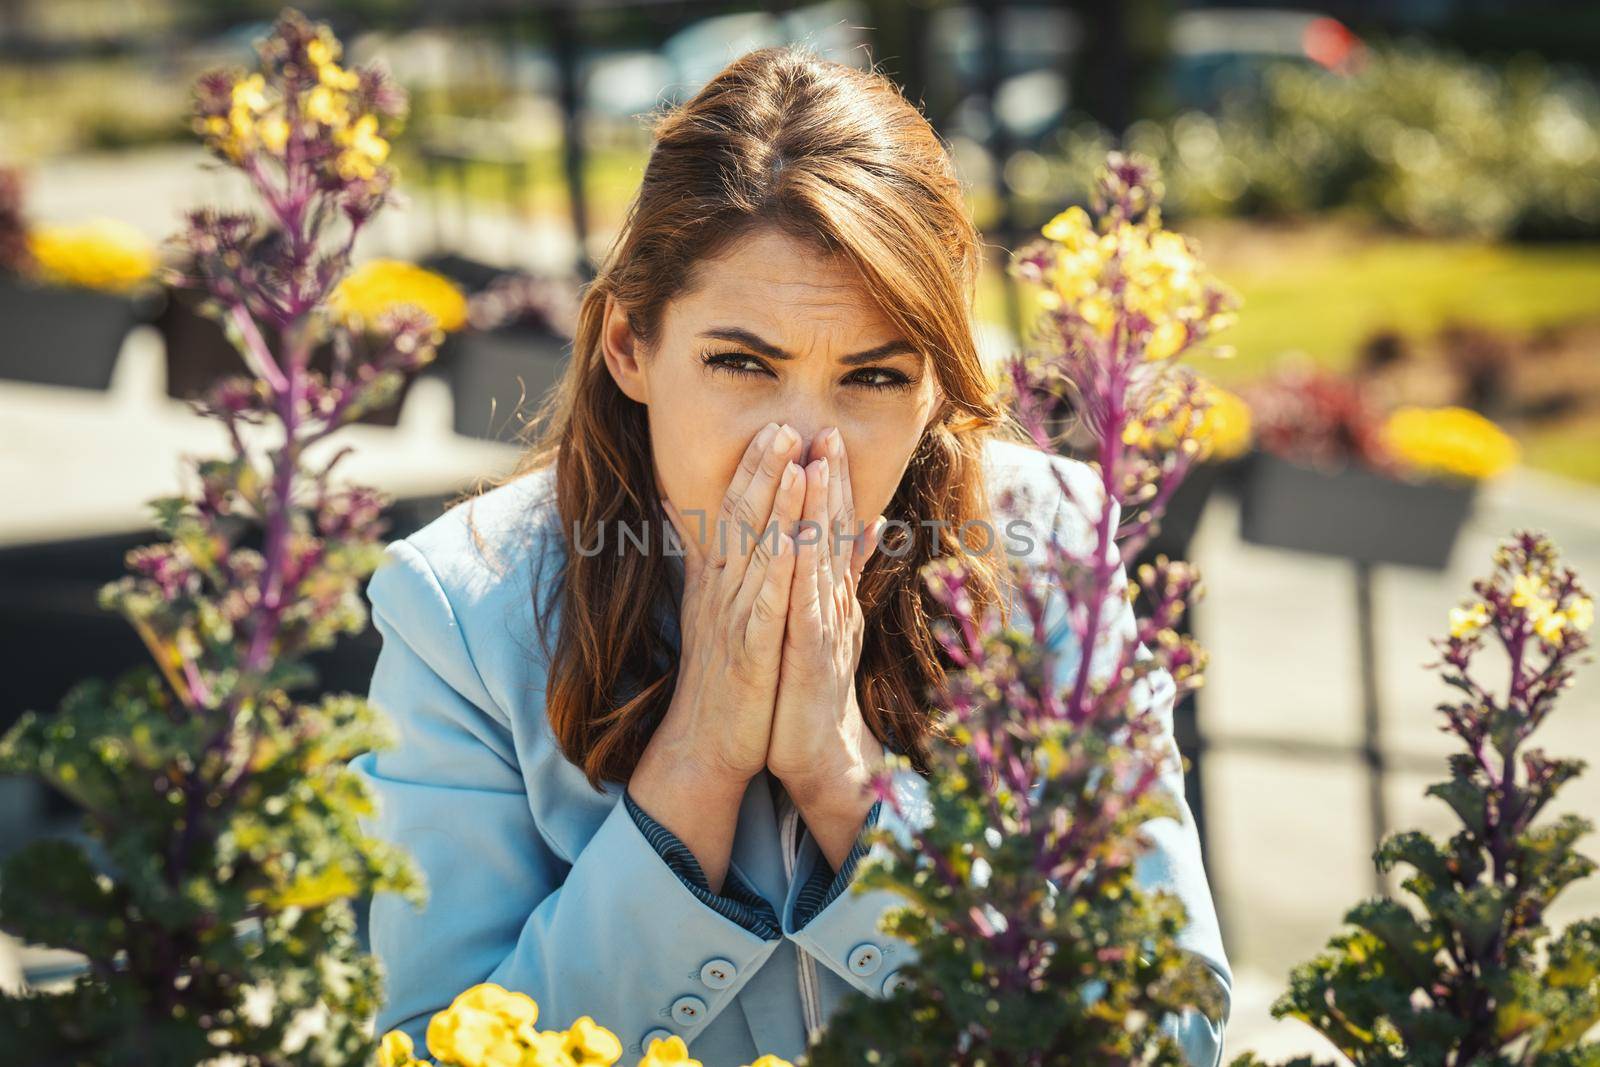 Young businesswoman on break outside sneezing due to allergies or colds.